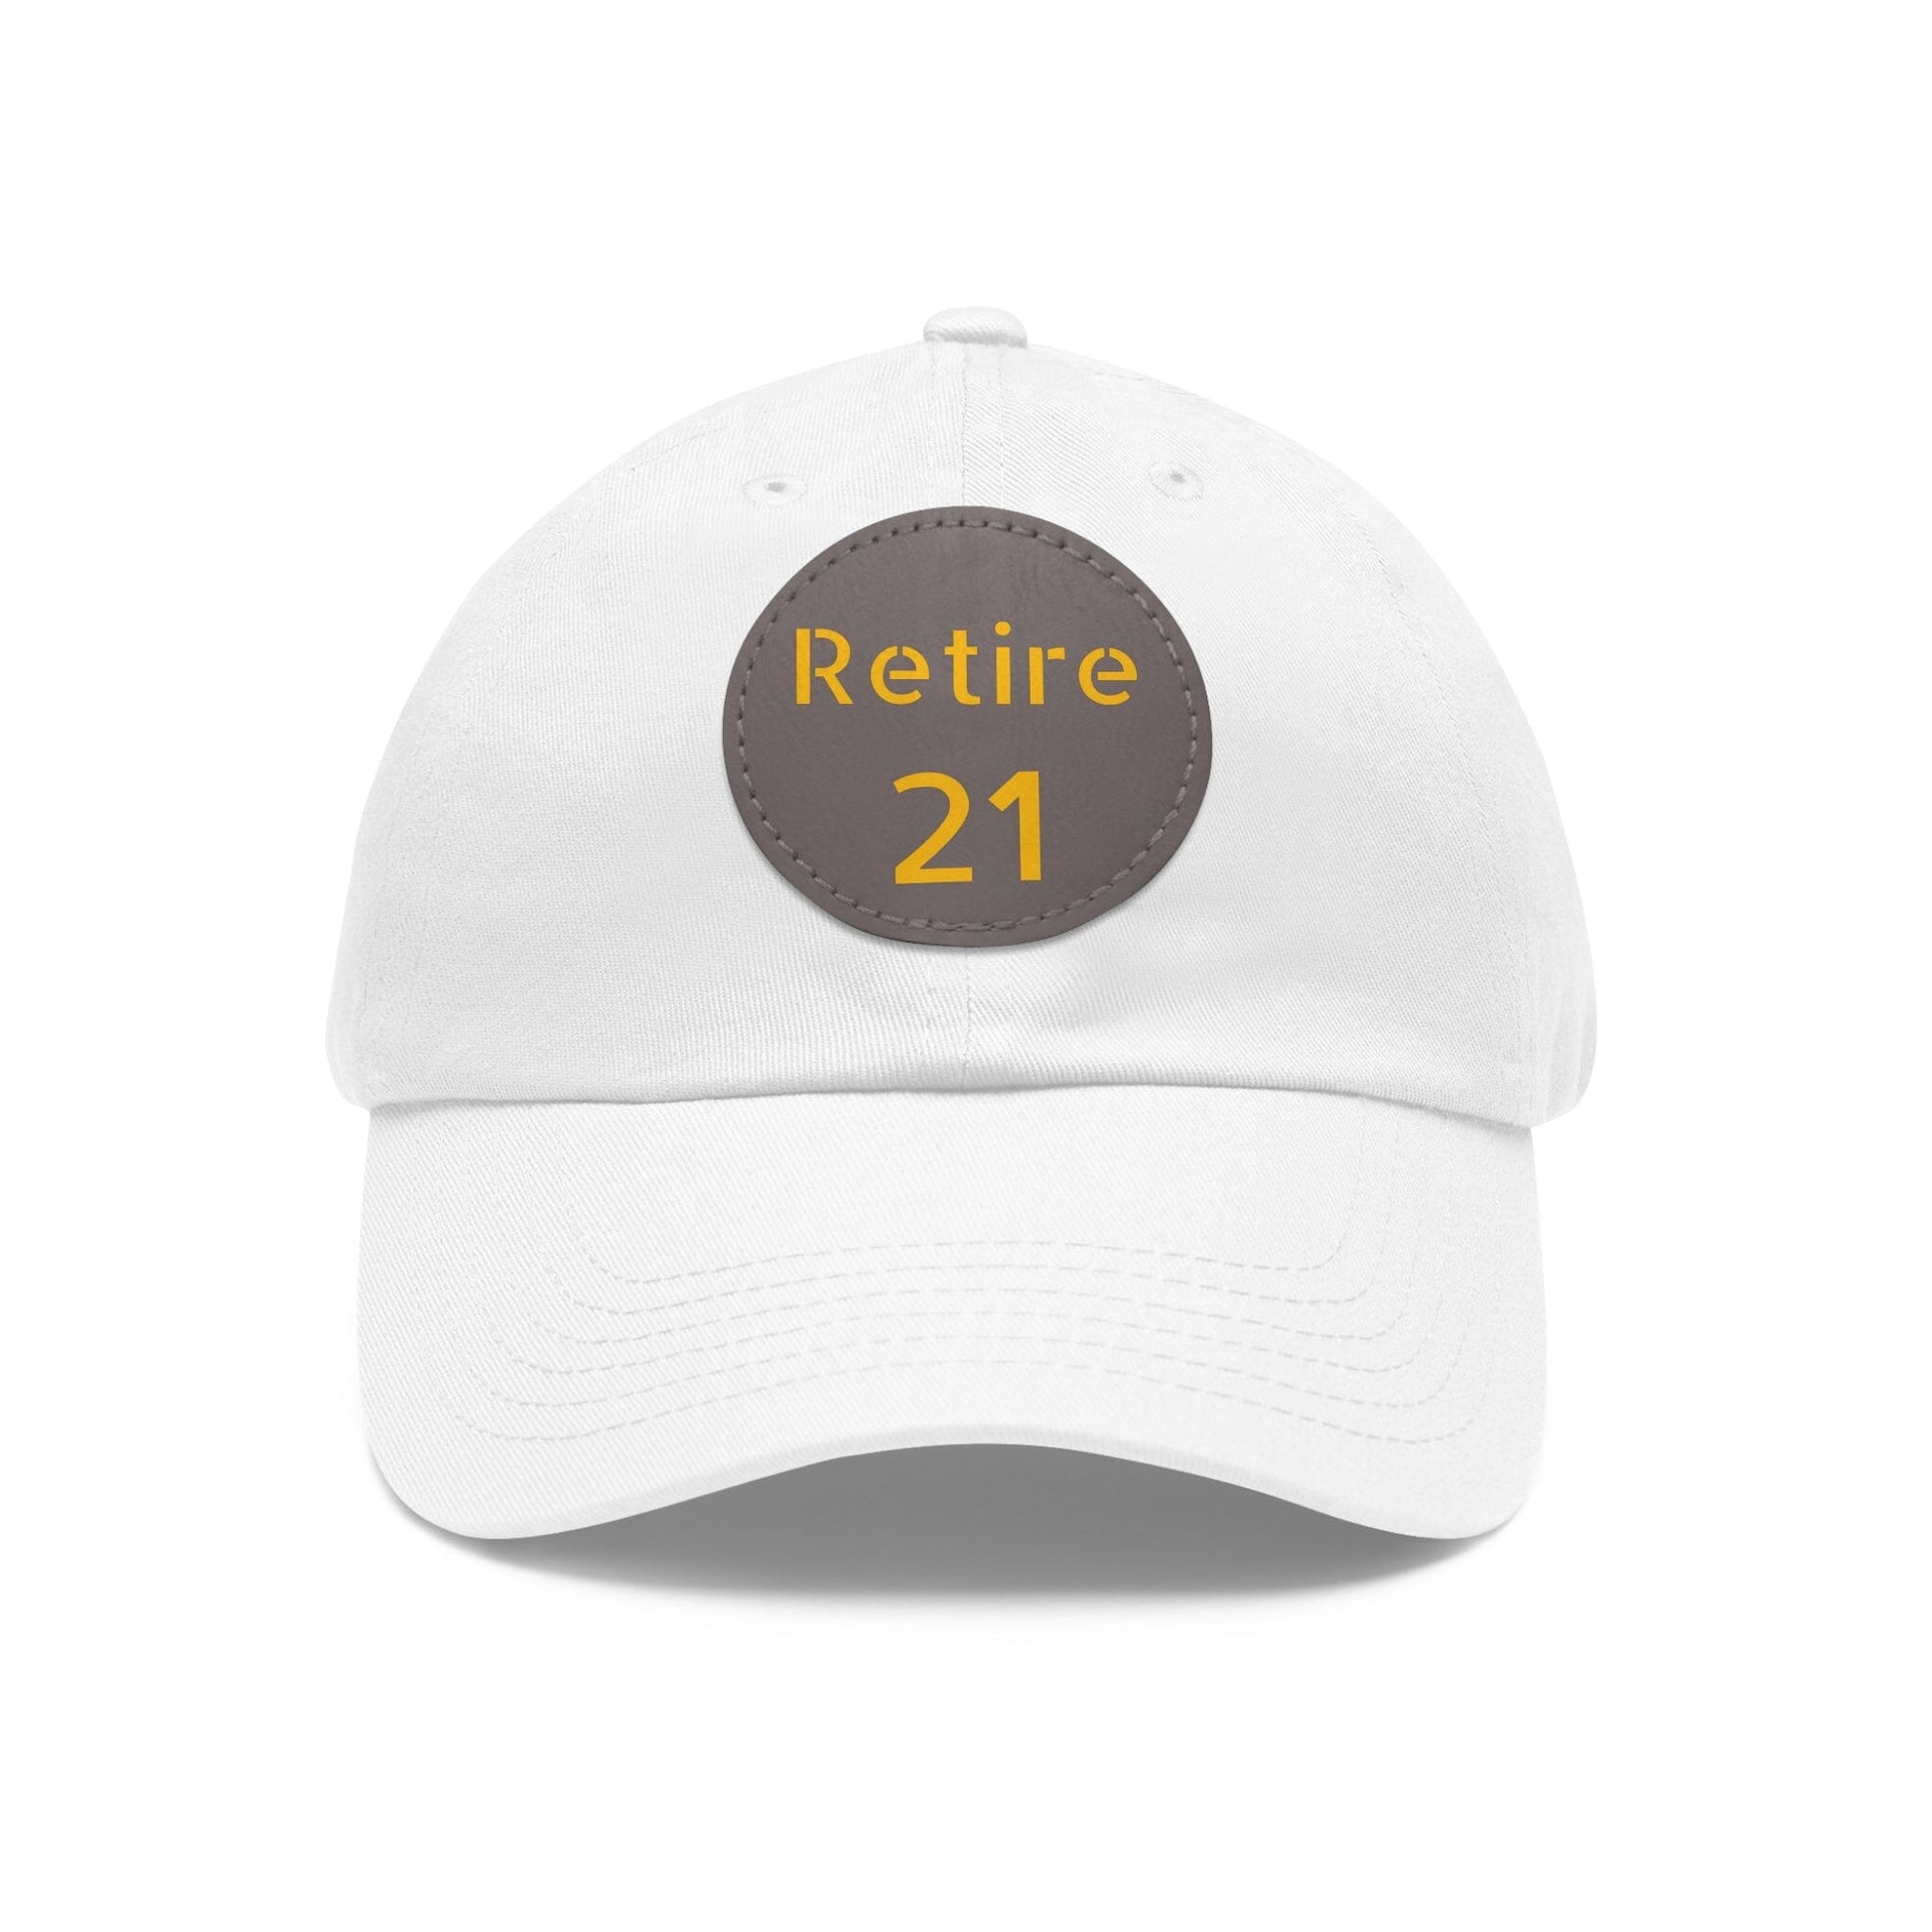 Retire 21 Hat With Leather Patch Hats Yinzergear White / Grey patch Circle One size